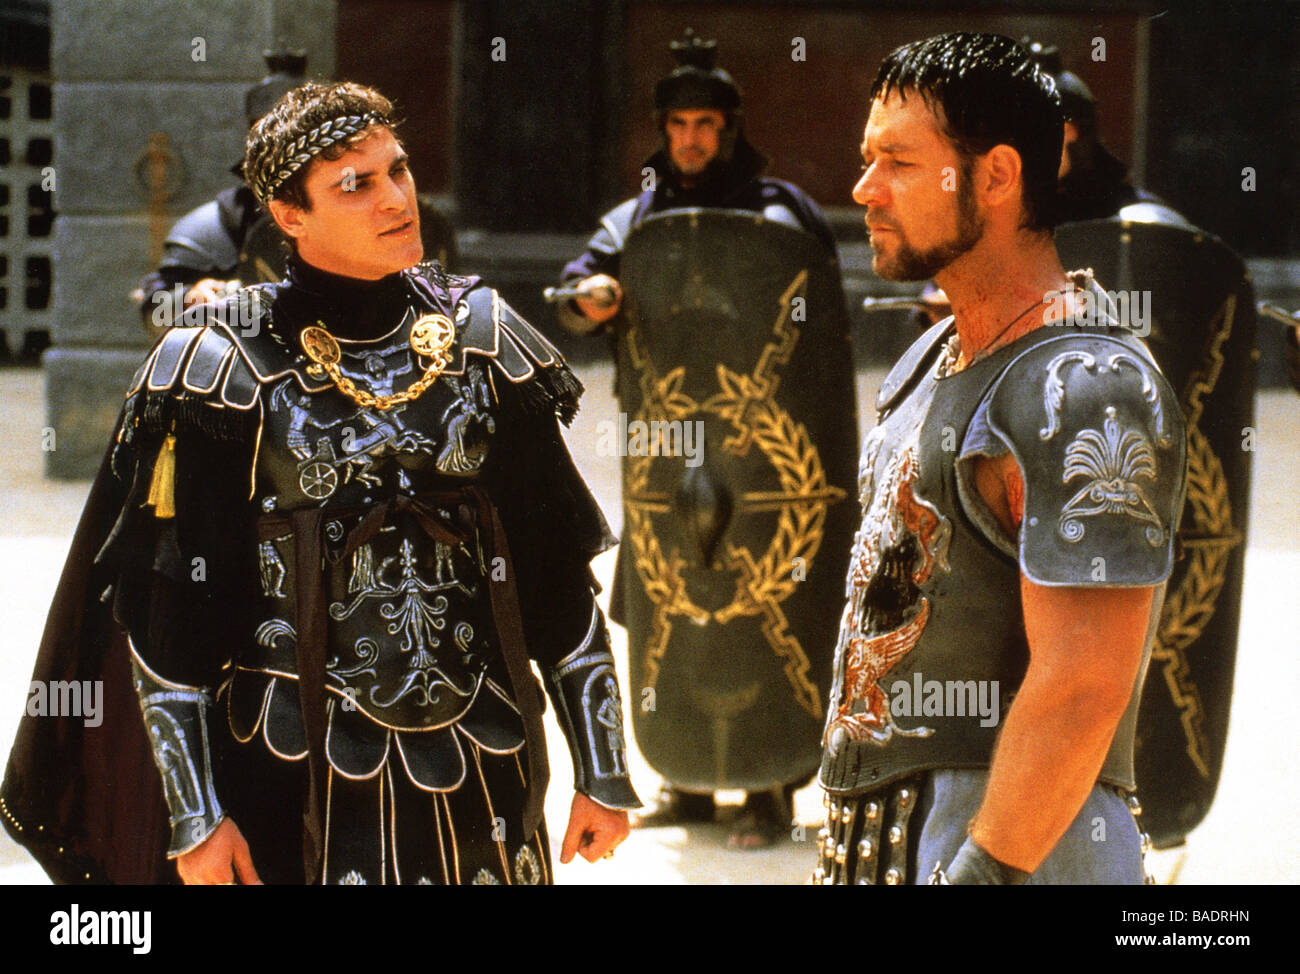 GLADIATOR 2000 Universal film with Russell Crowe at right and Joaquin Phoenix Stock Photo